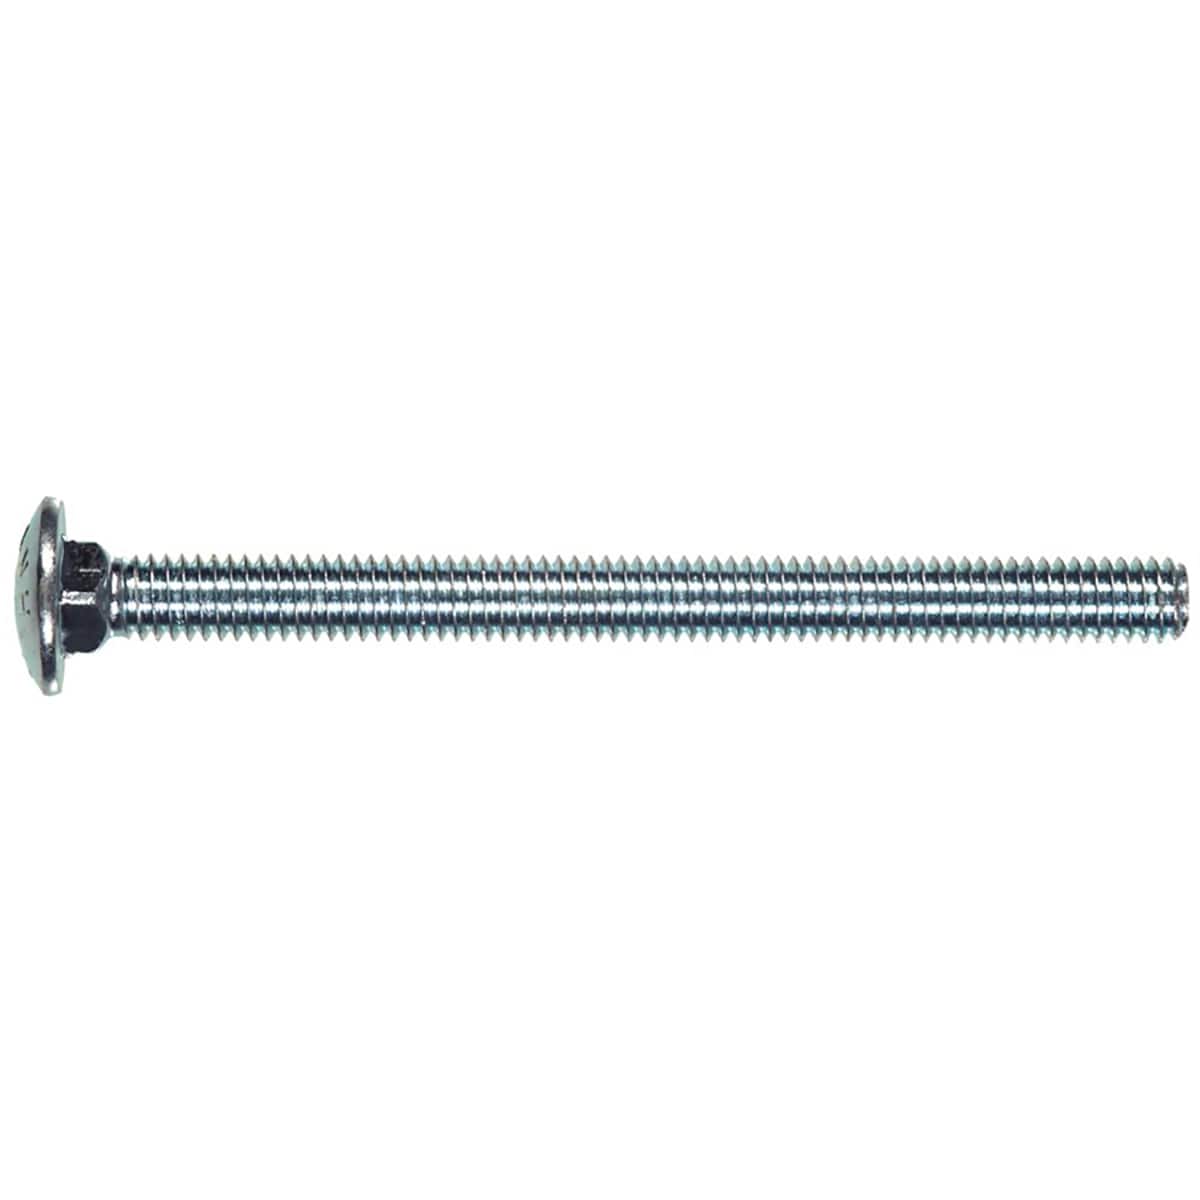 pcs 1/4-20 x 3 1/2 Carriage Bolt Zinc Plated A307 Set #RD-0435FST Warranity by Pr-Mch Package of 25 